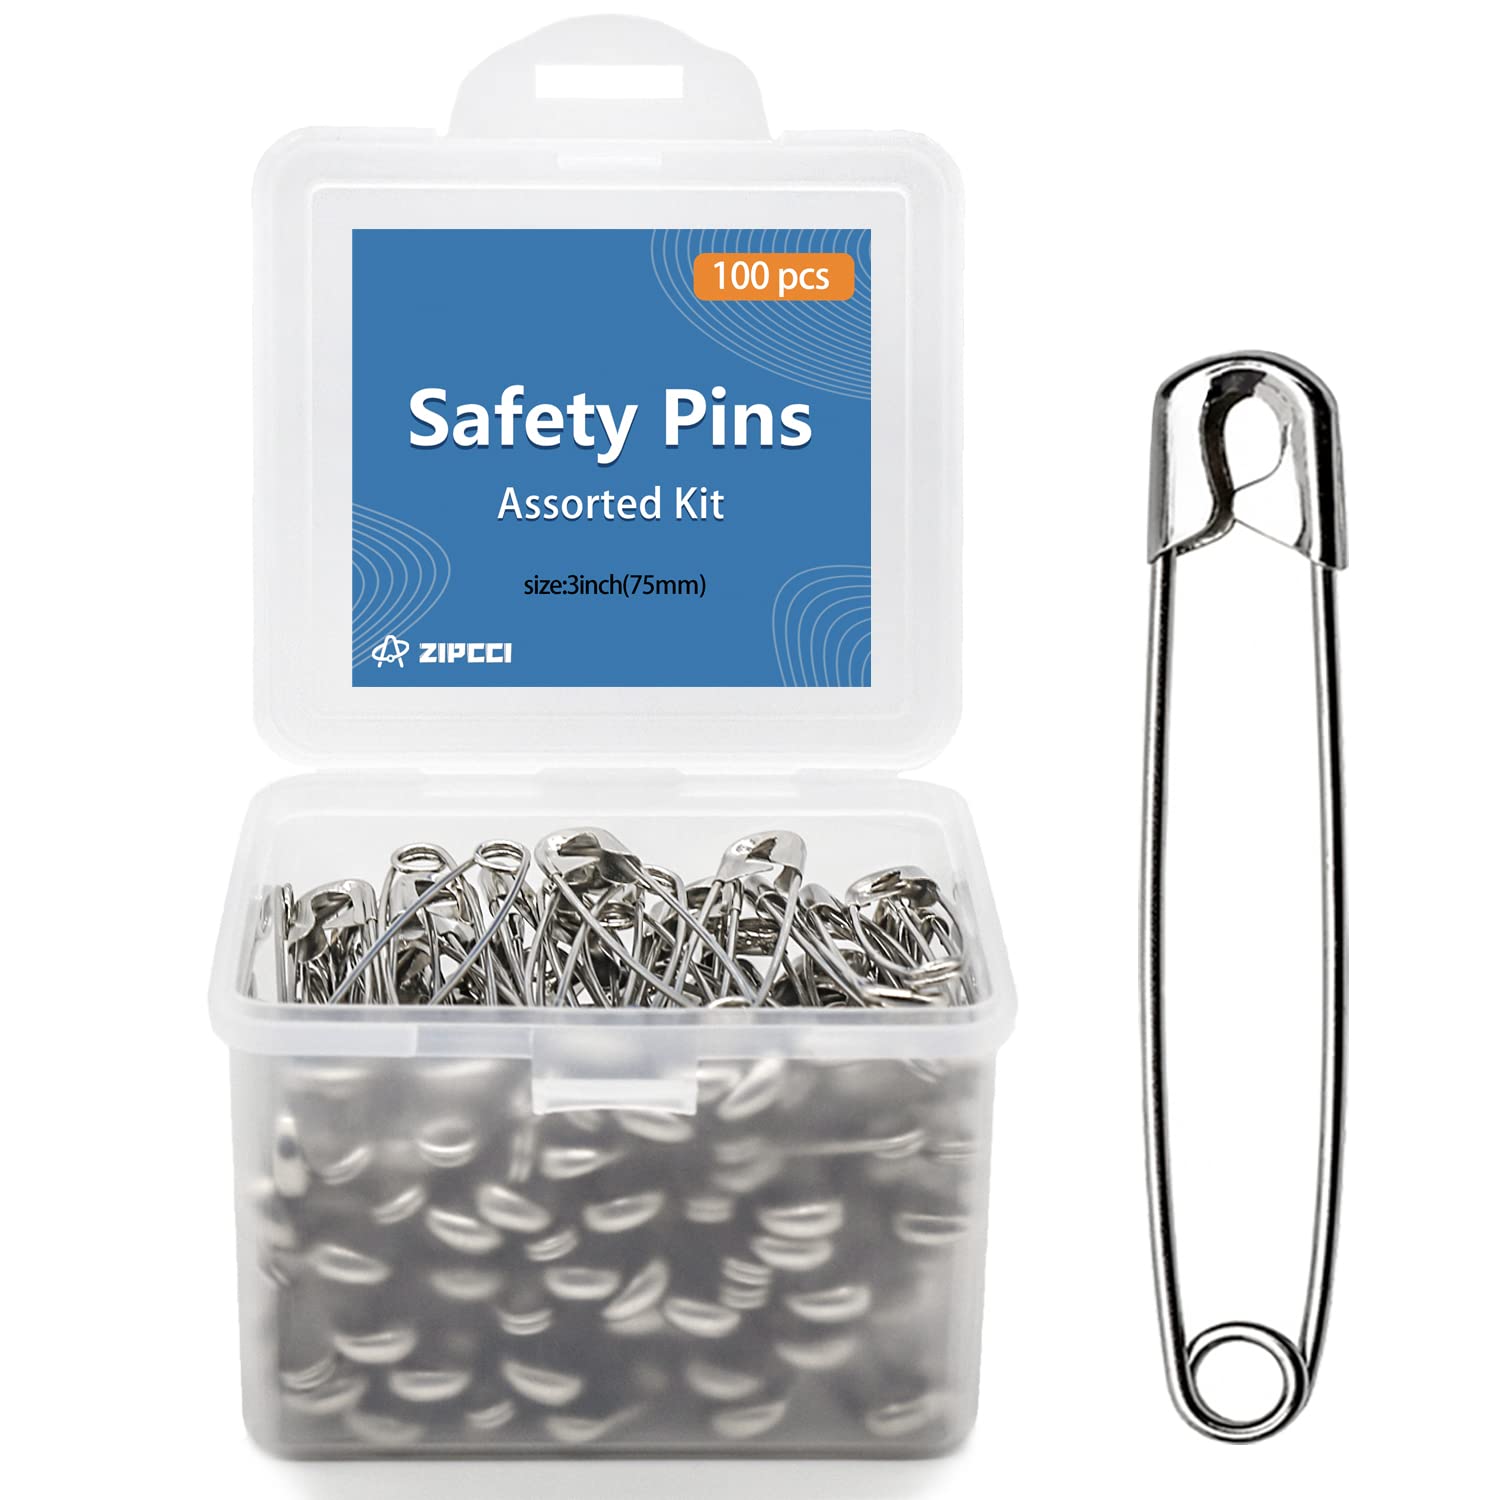 SAFETY PIN PACK – FABSCRAP